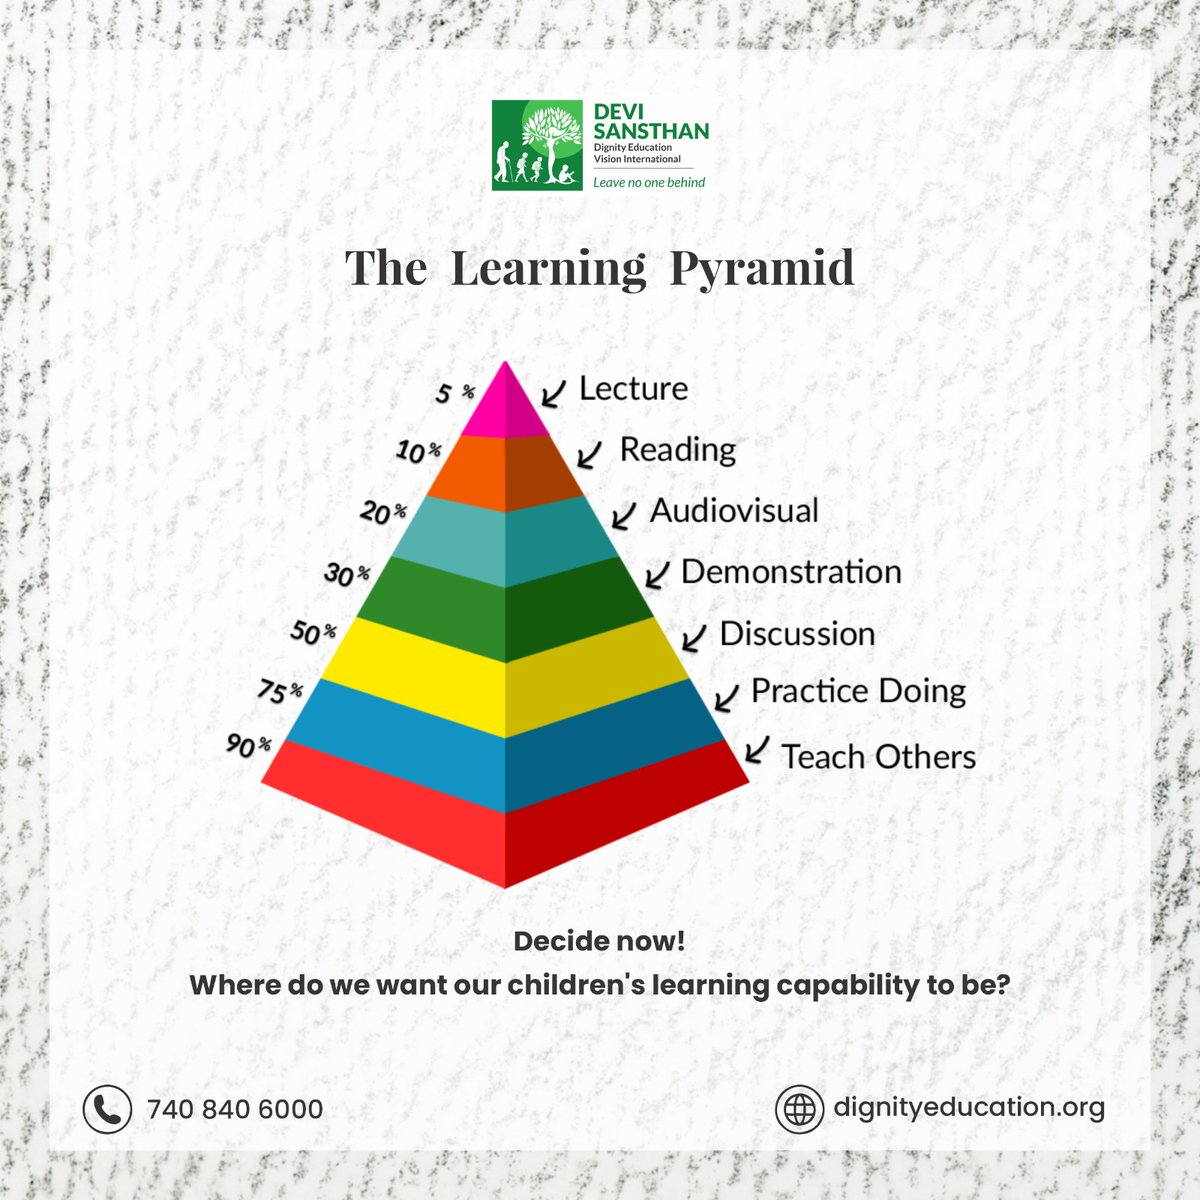 Where do we want our children's learning capability to be?
Follow @DEVI_Sansthan 
#LearningPyramid #EffectiveLearning #EducationSuccess #ActiveLearning #RetrievalPractice #MemorizationTechniques #LearningStrategies #StudySkills #EducationalPsychology #DEVISansthan #education